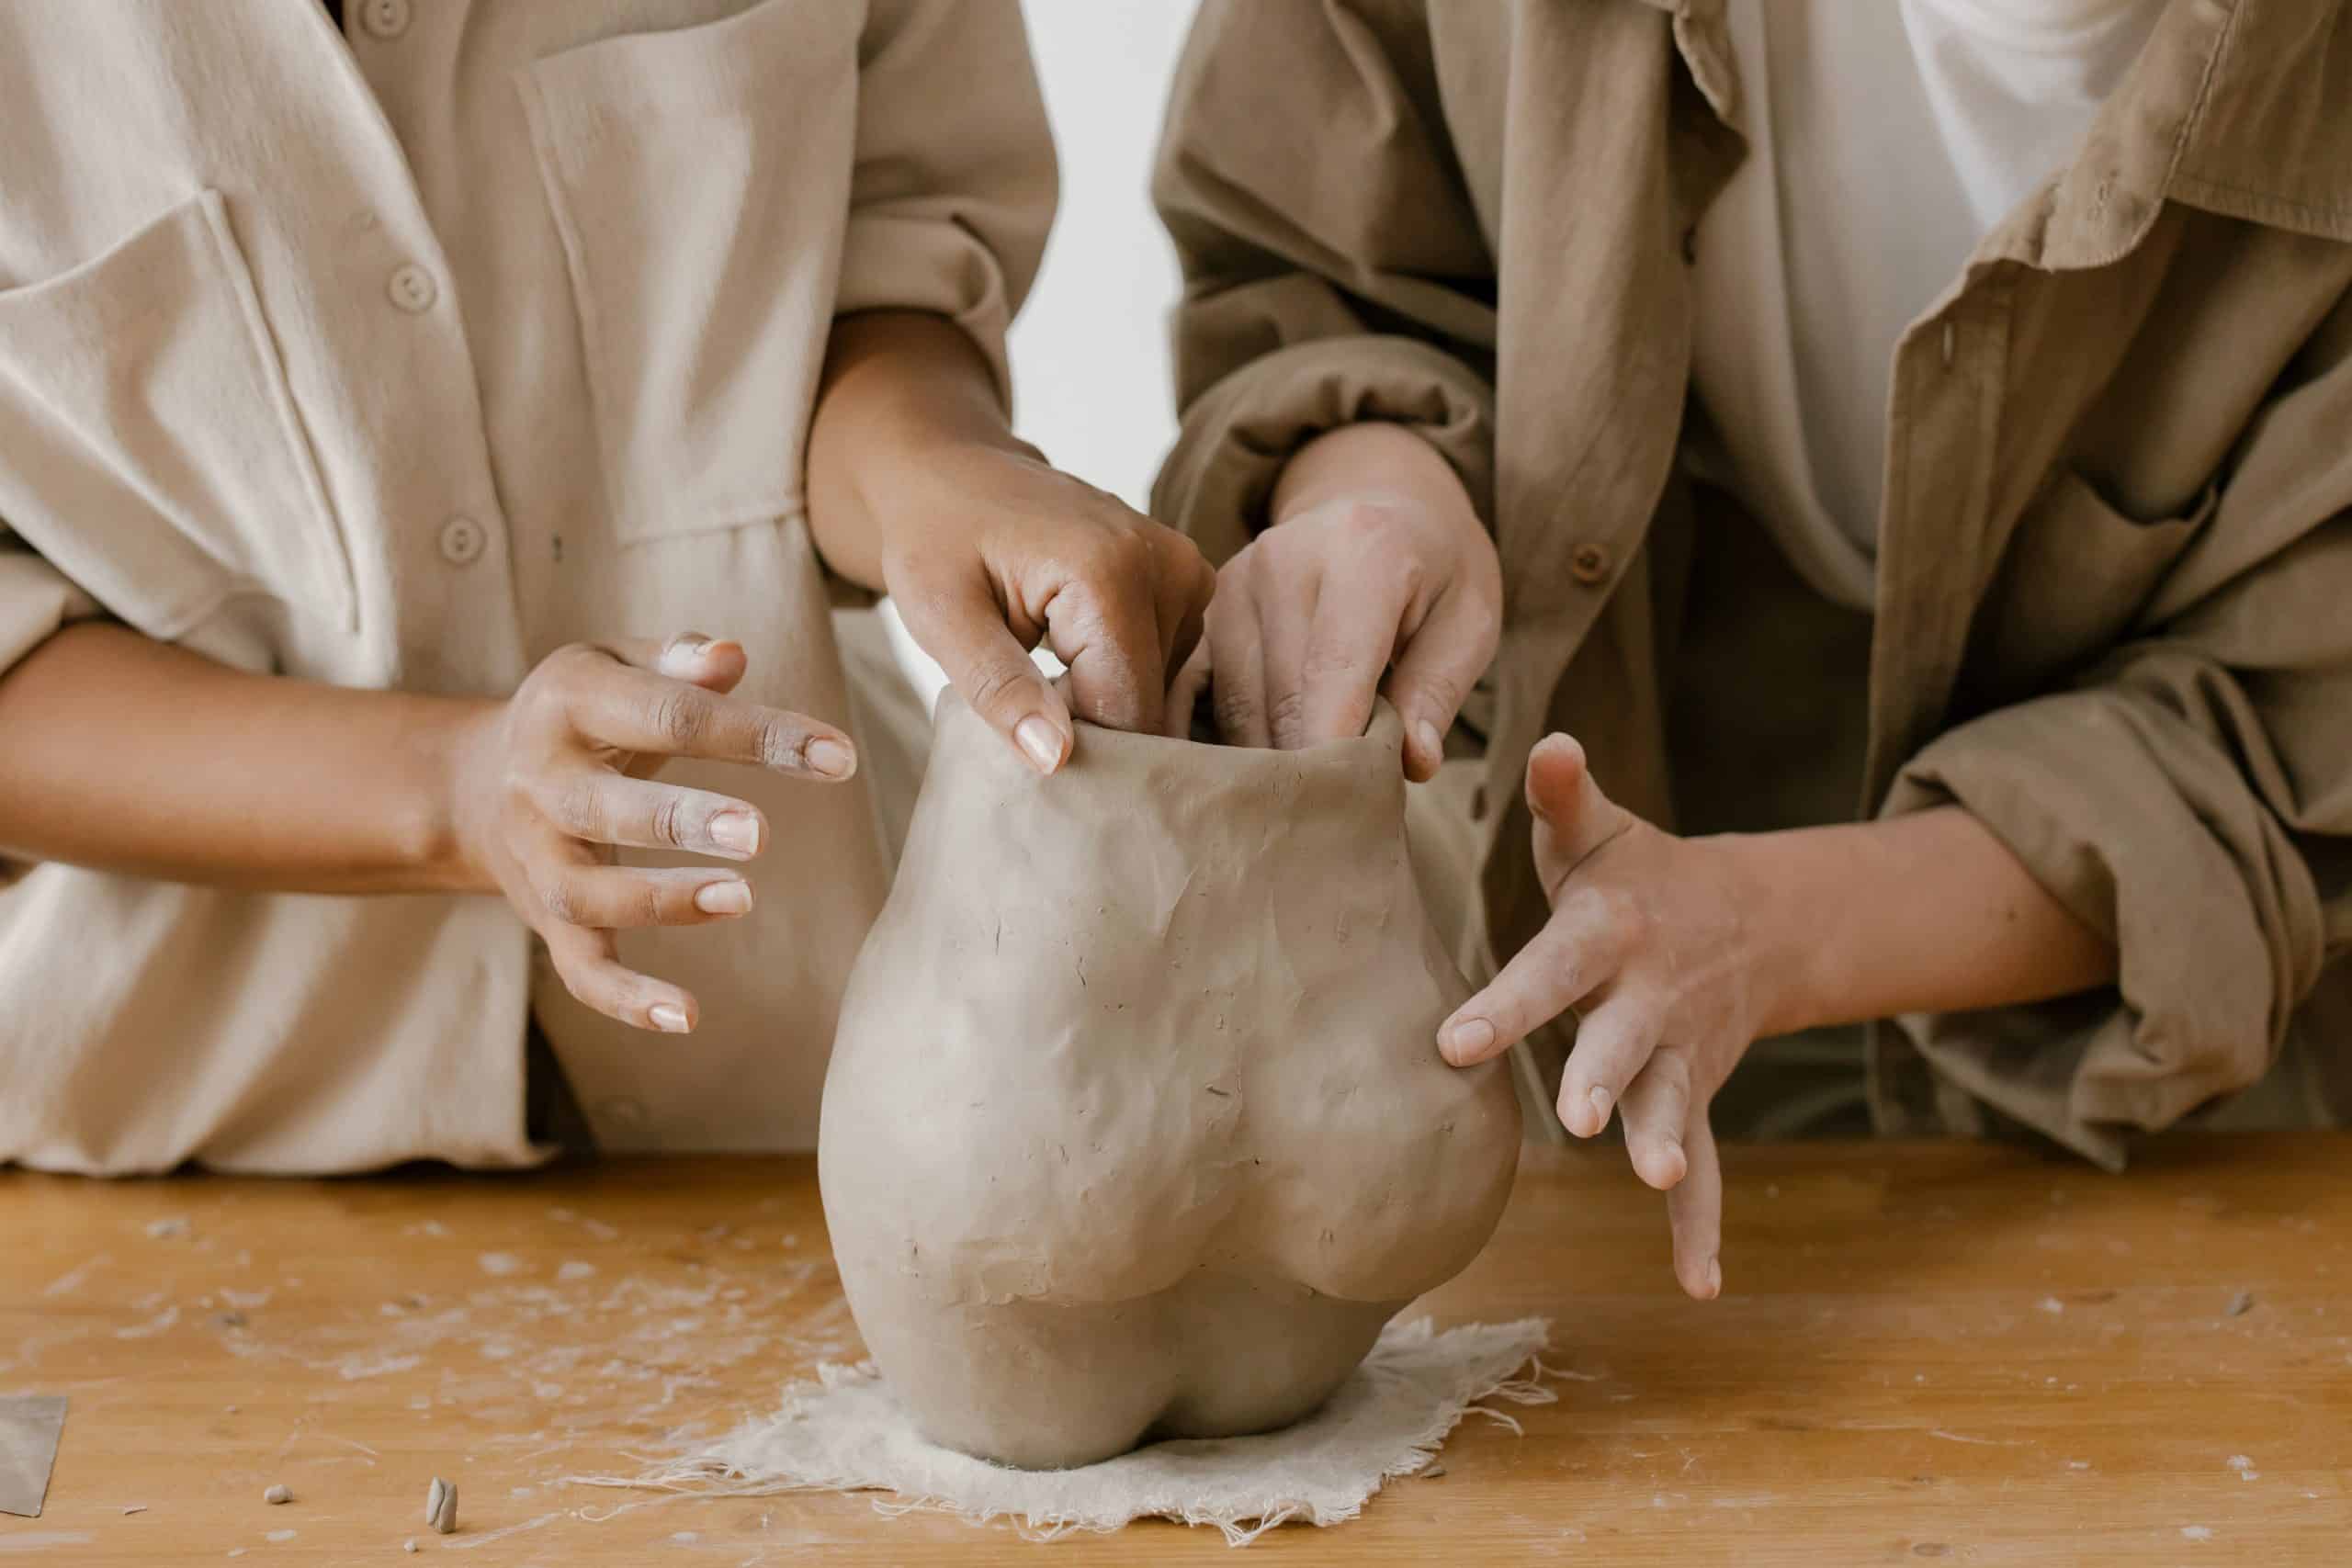 A hen do activity idea is book or bum pottery for lots of fun and giggles with your friends!